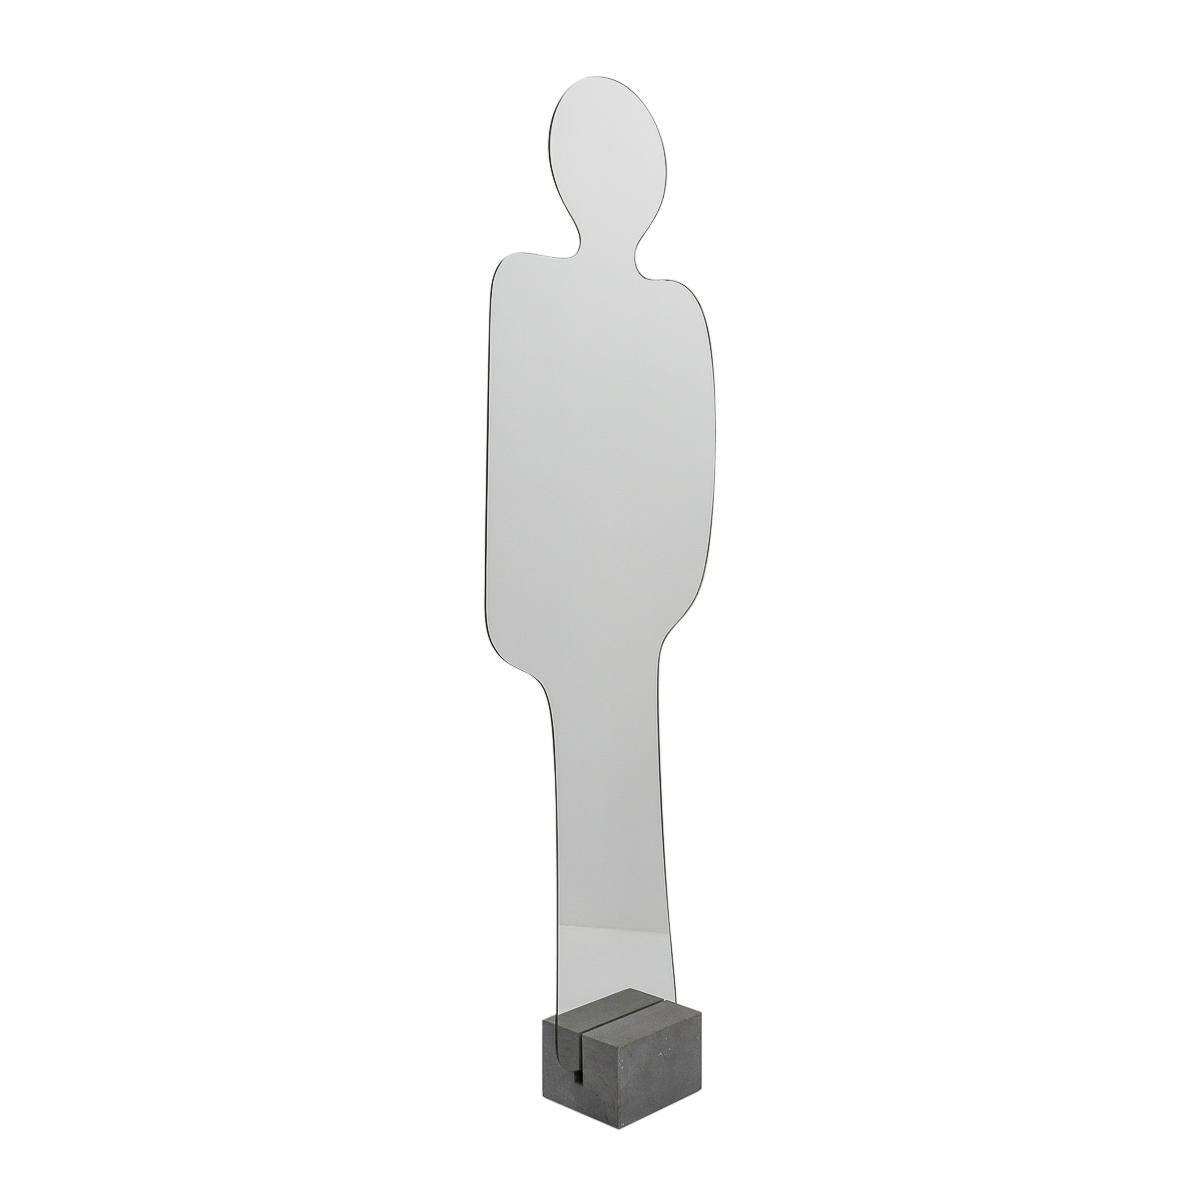 Human silhouette-shaped mirror or valet stand “Narcisio” by the French fashion designer Pierre Cardin for Acerbis, Italy.

The plastic-backed mirror is placed in the heavy concrete base, where it measures an impressive 180 cm height. 


